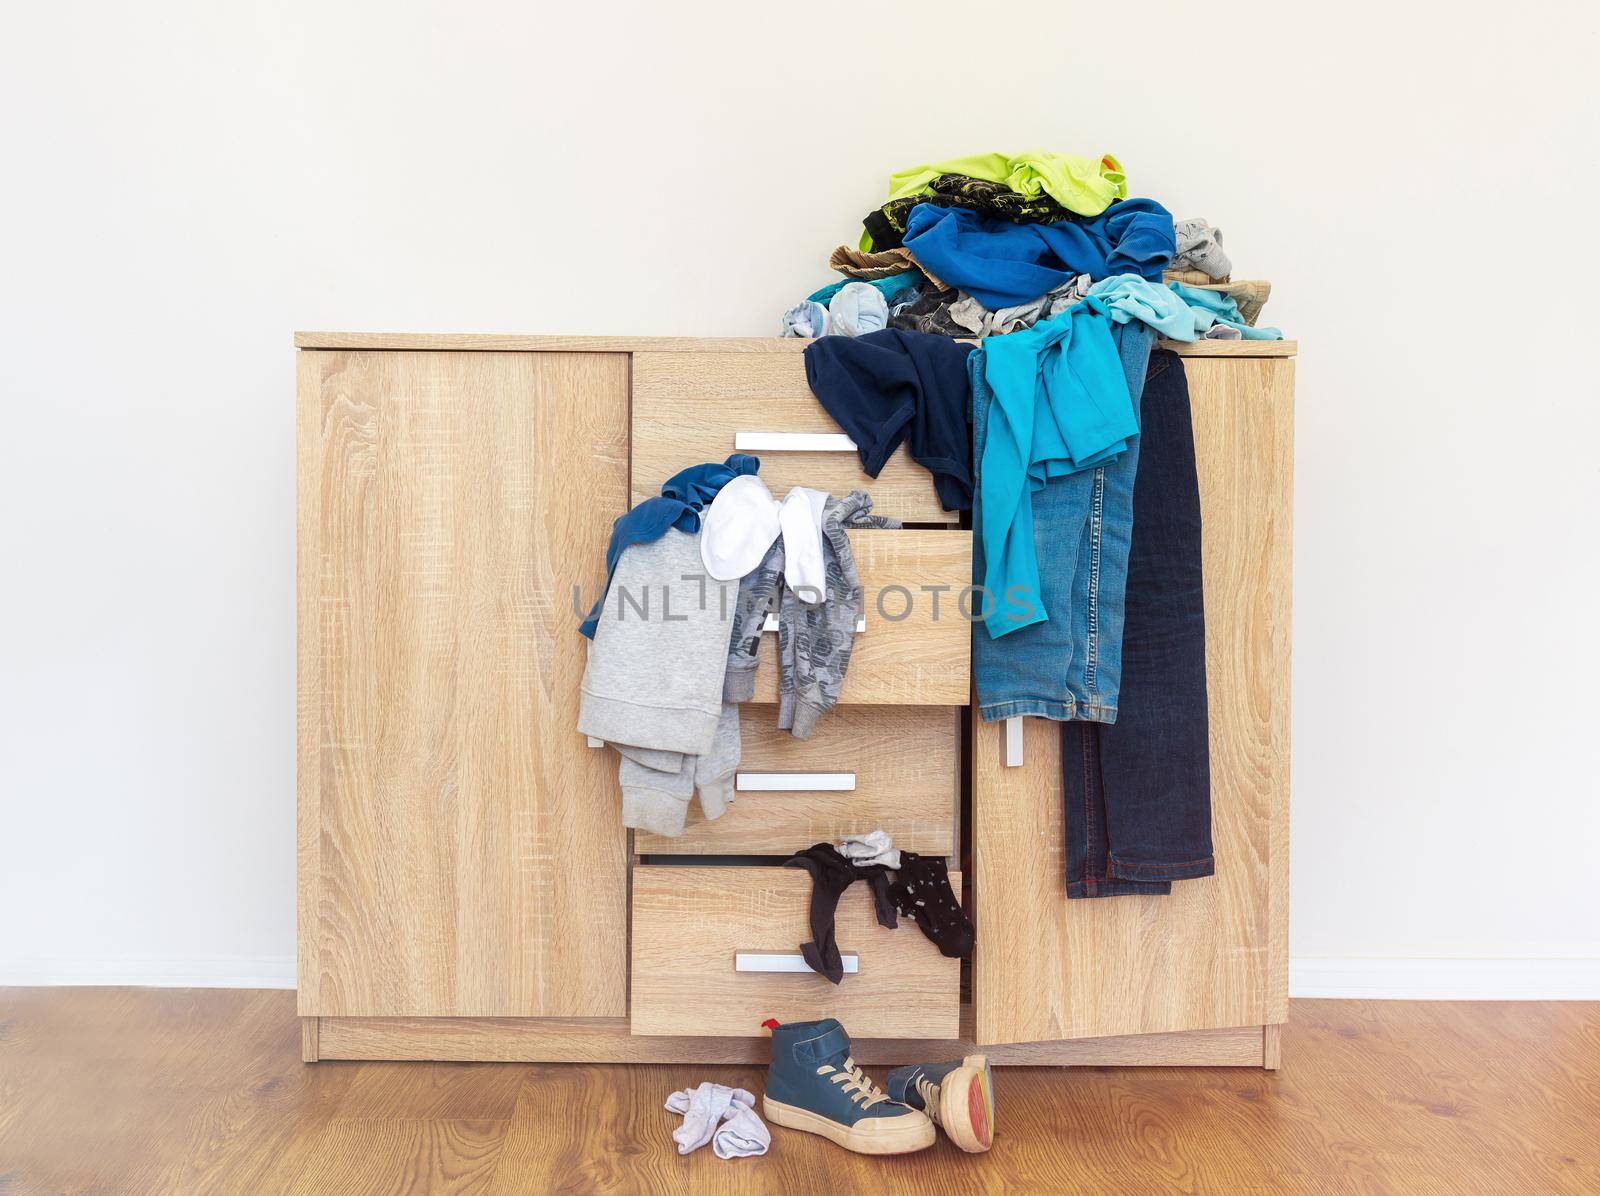 open drawers of a wooden chest of drawers with clothes falling out and piles of things around in a mess. The concept of space organization, order, home routine, cleaning. Light background, copy paste.